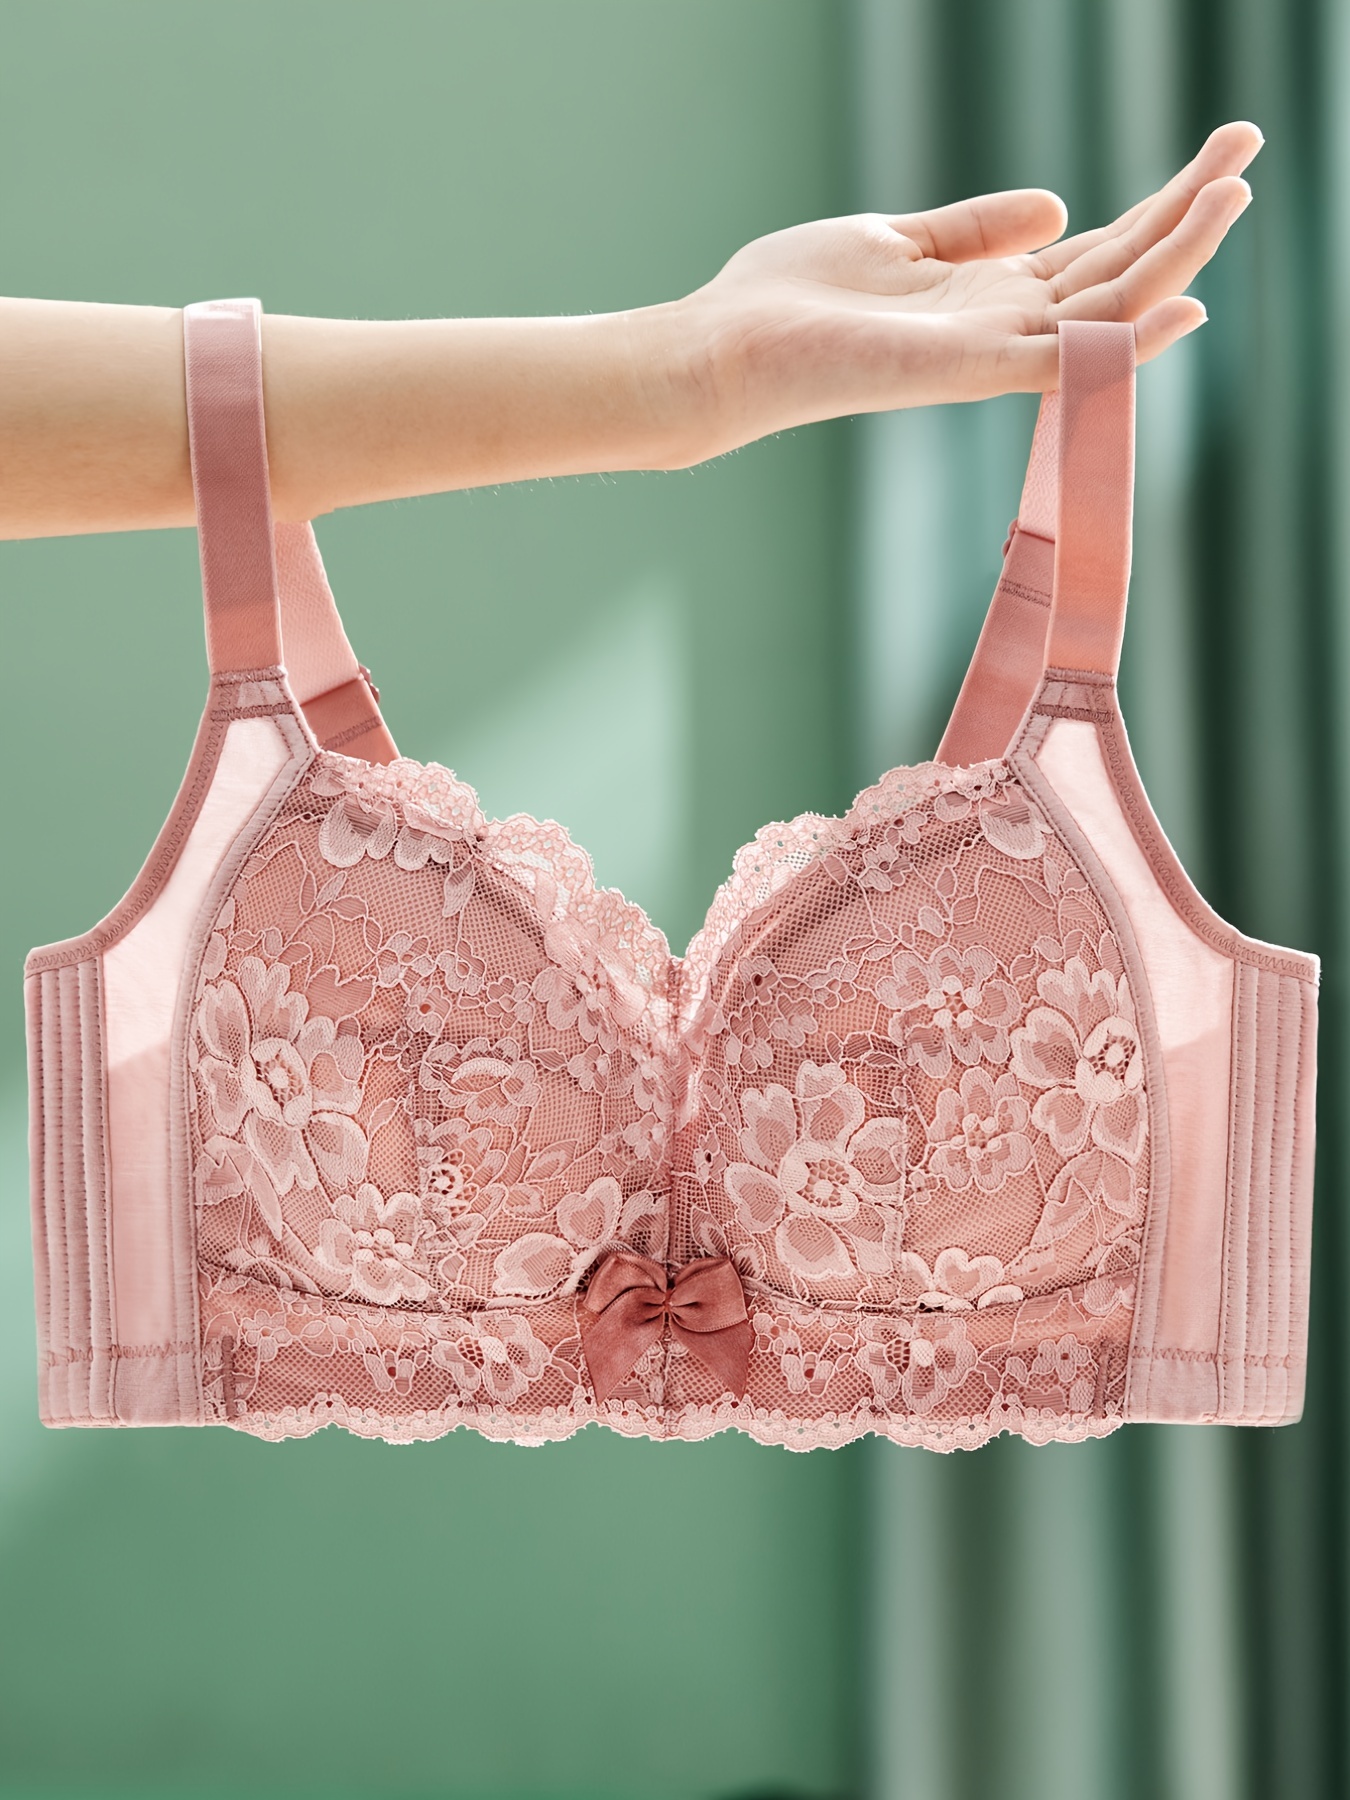  Plus Size Bras for Women Floral Lace Bralette Wirefree